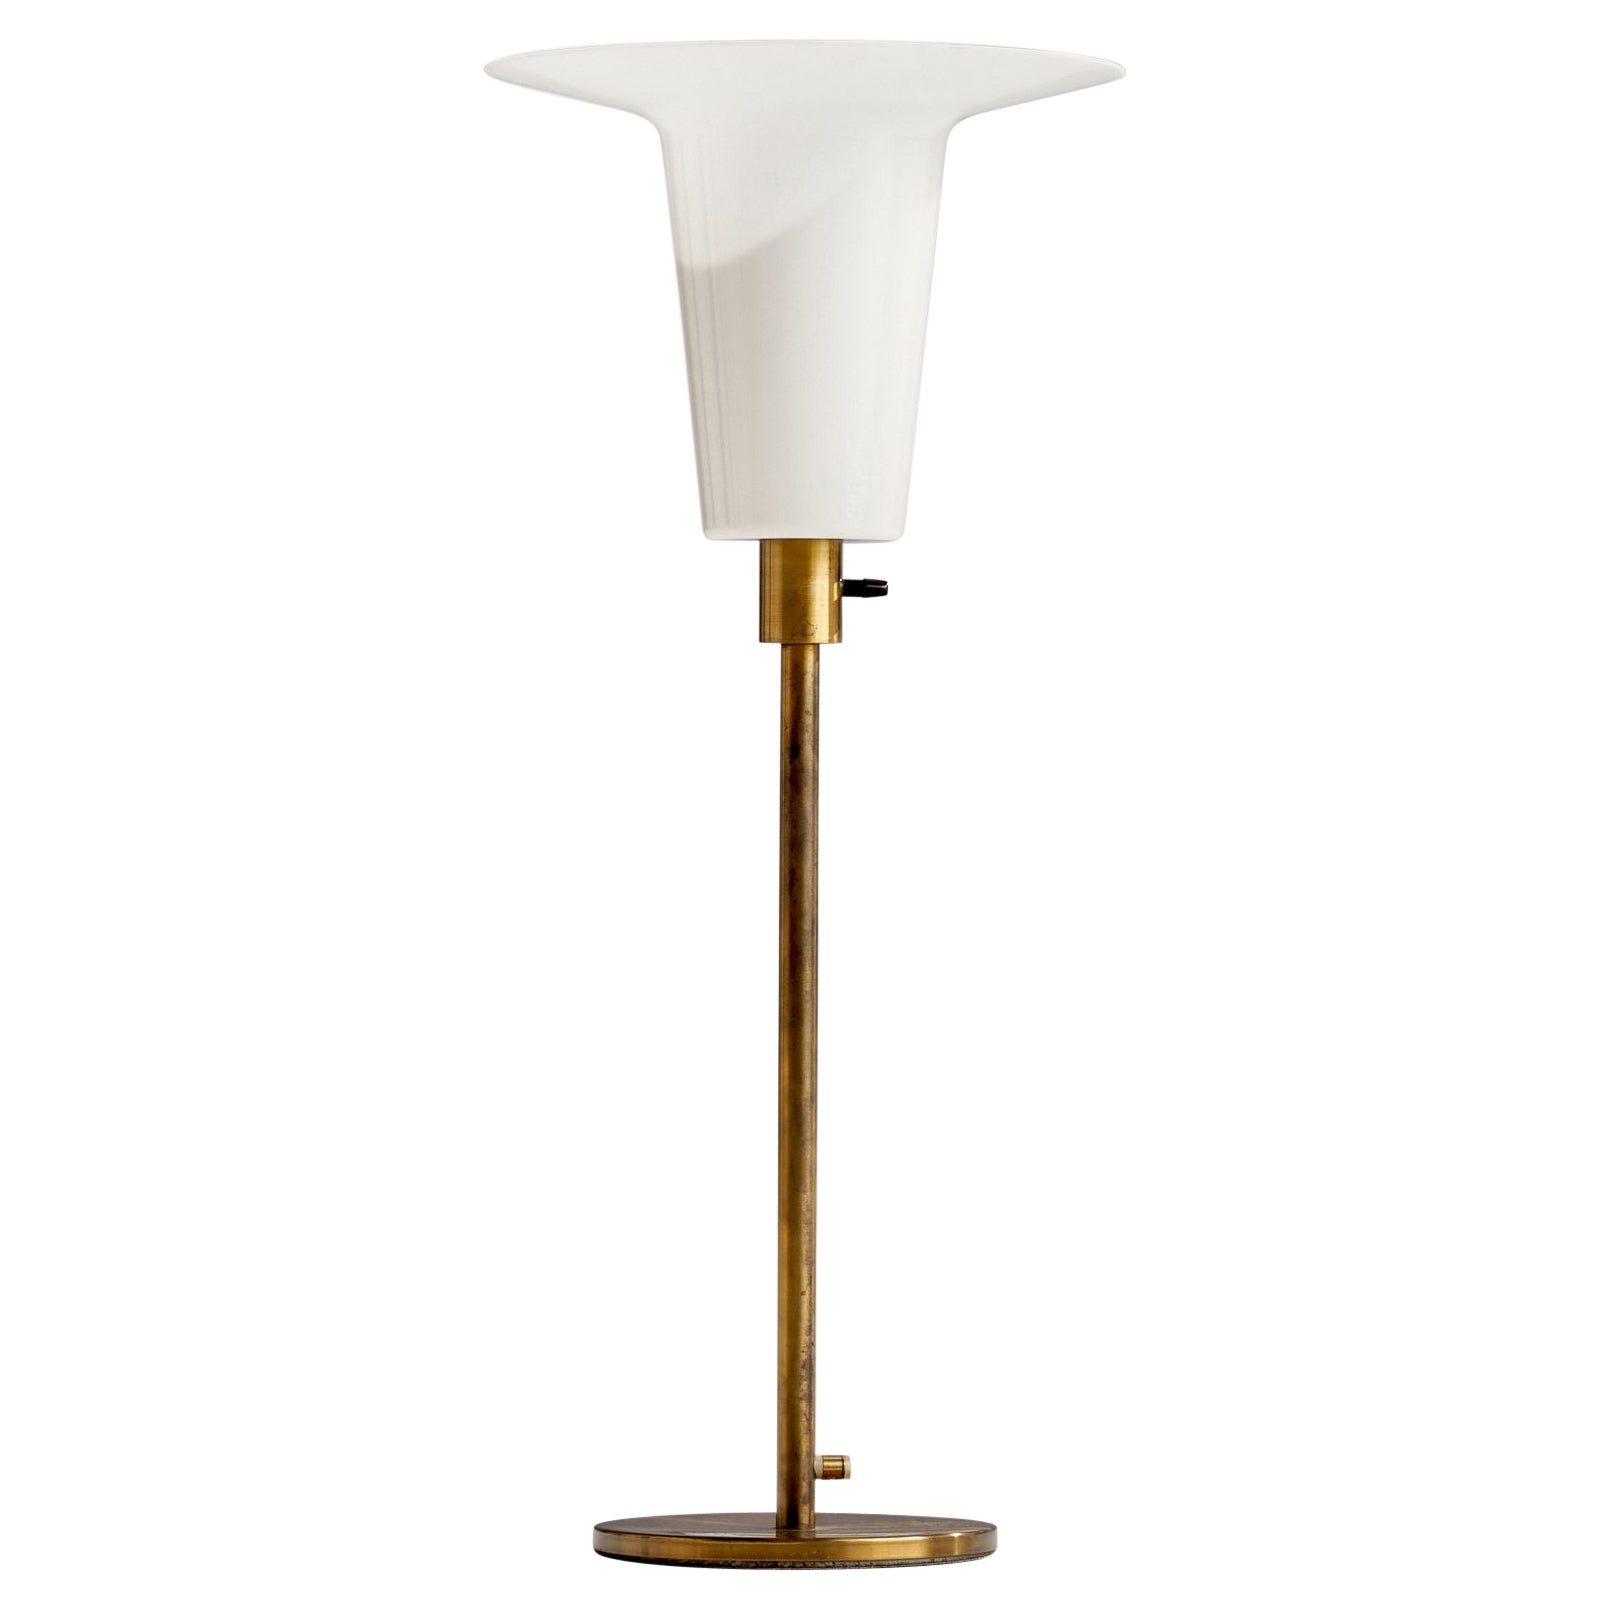 Wolfgang Haase, Large "Basis" Table Lamp, Brass, Acrylic, Sweden, 1967